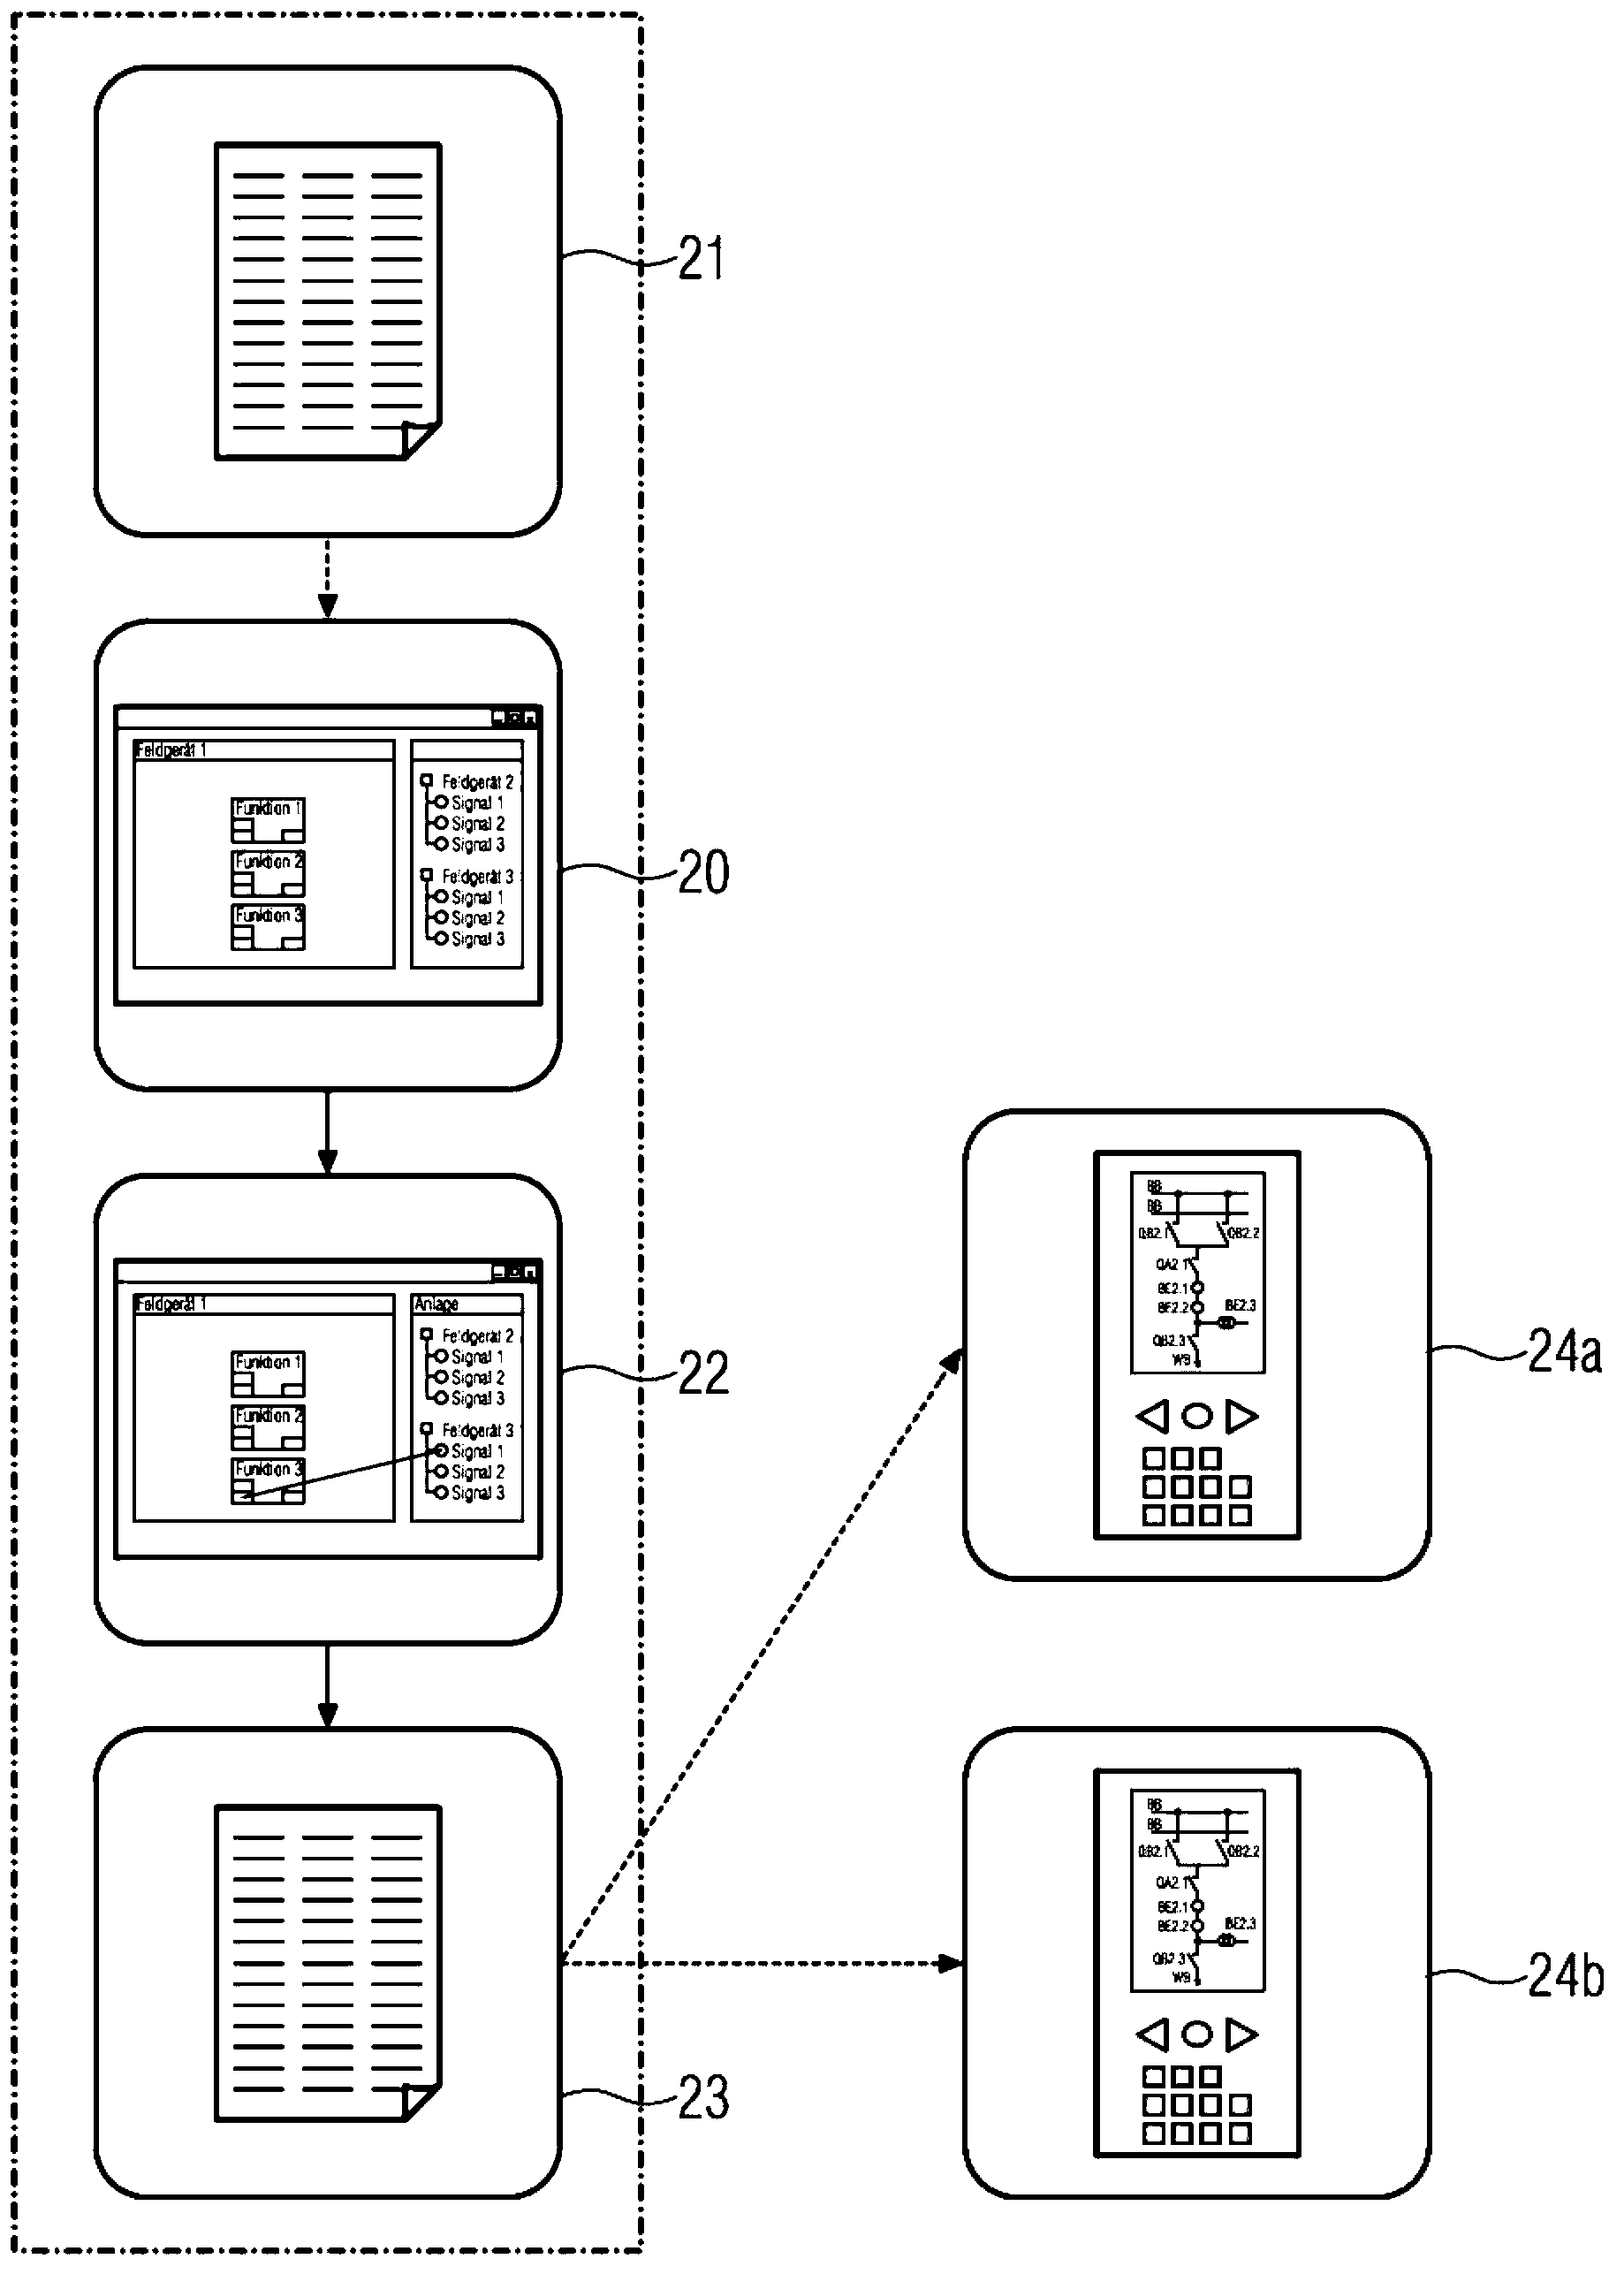 Configuration of the communication links of field devices in a power automation installation